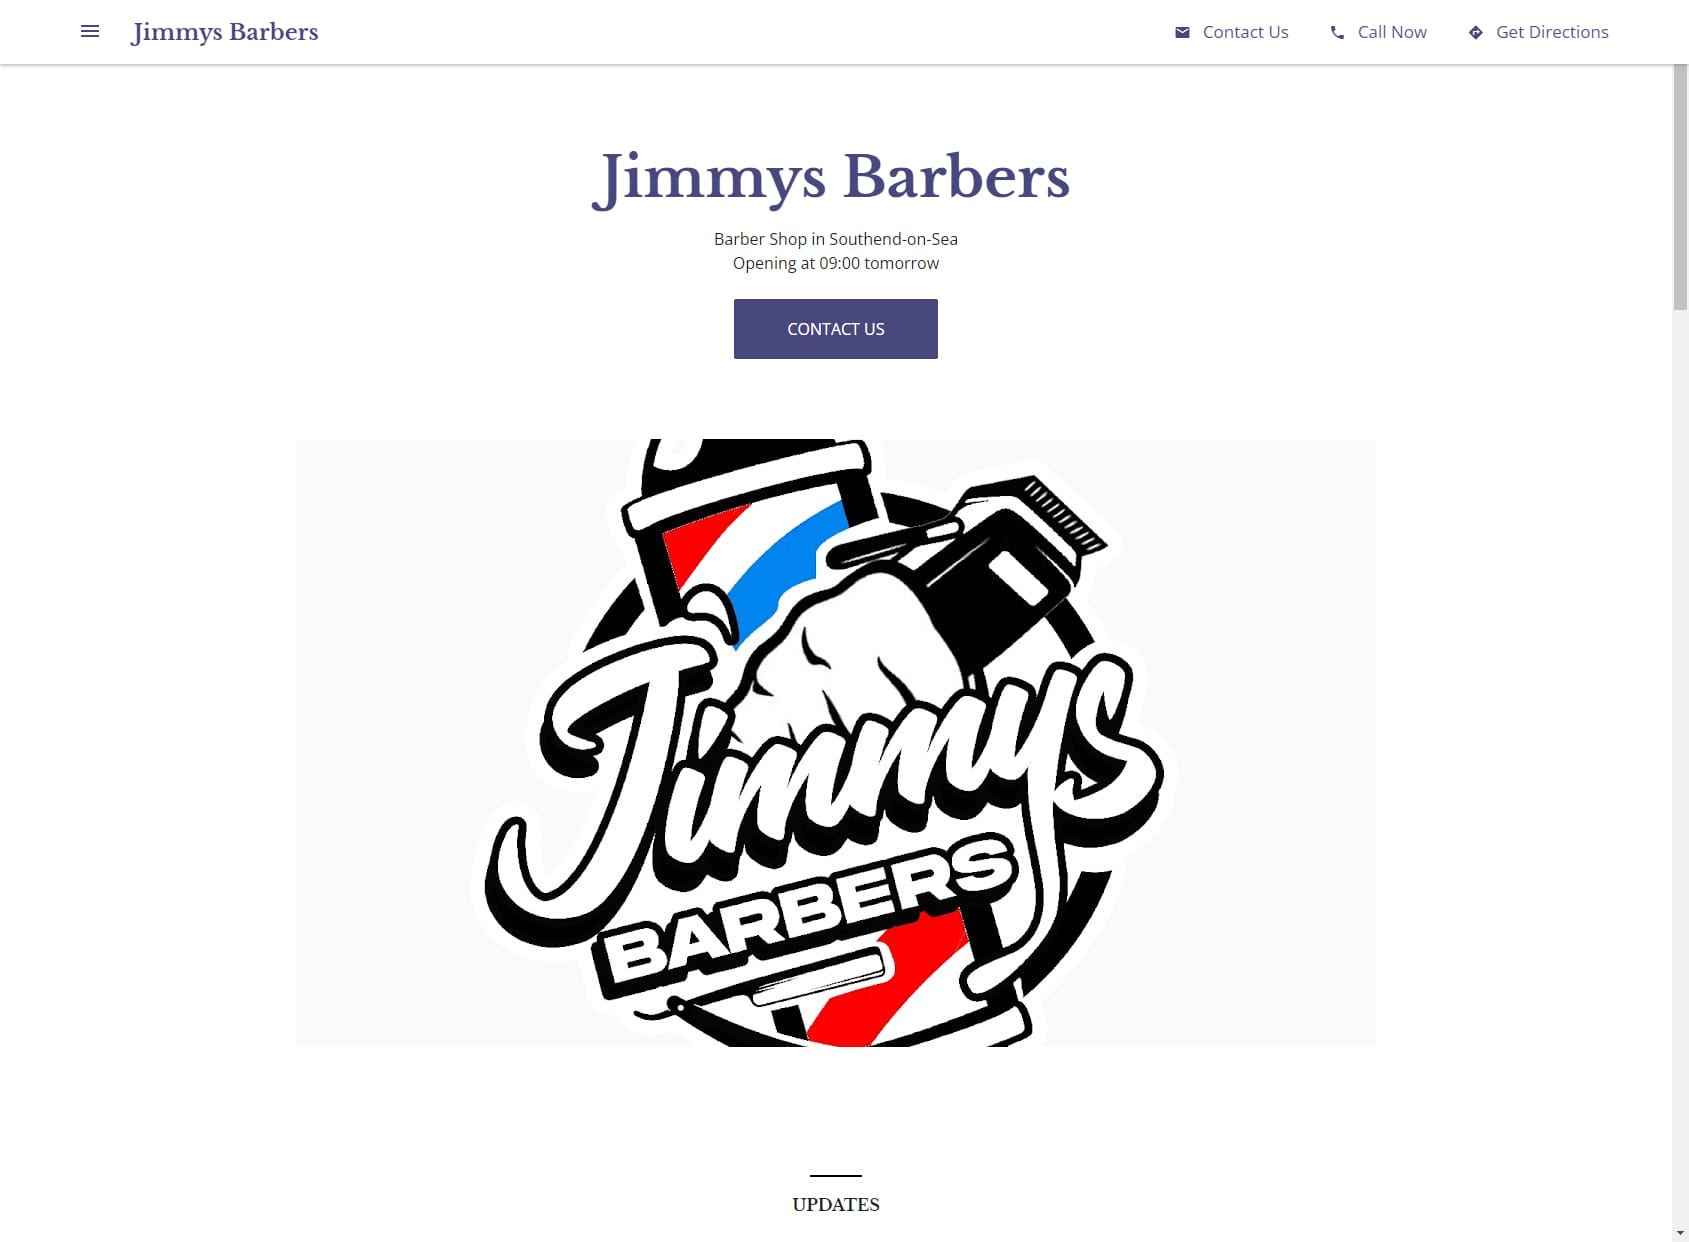 Jimmys Barbers